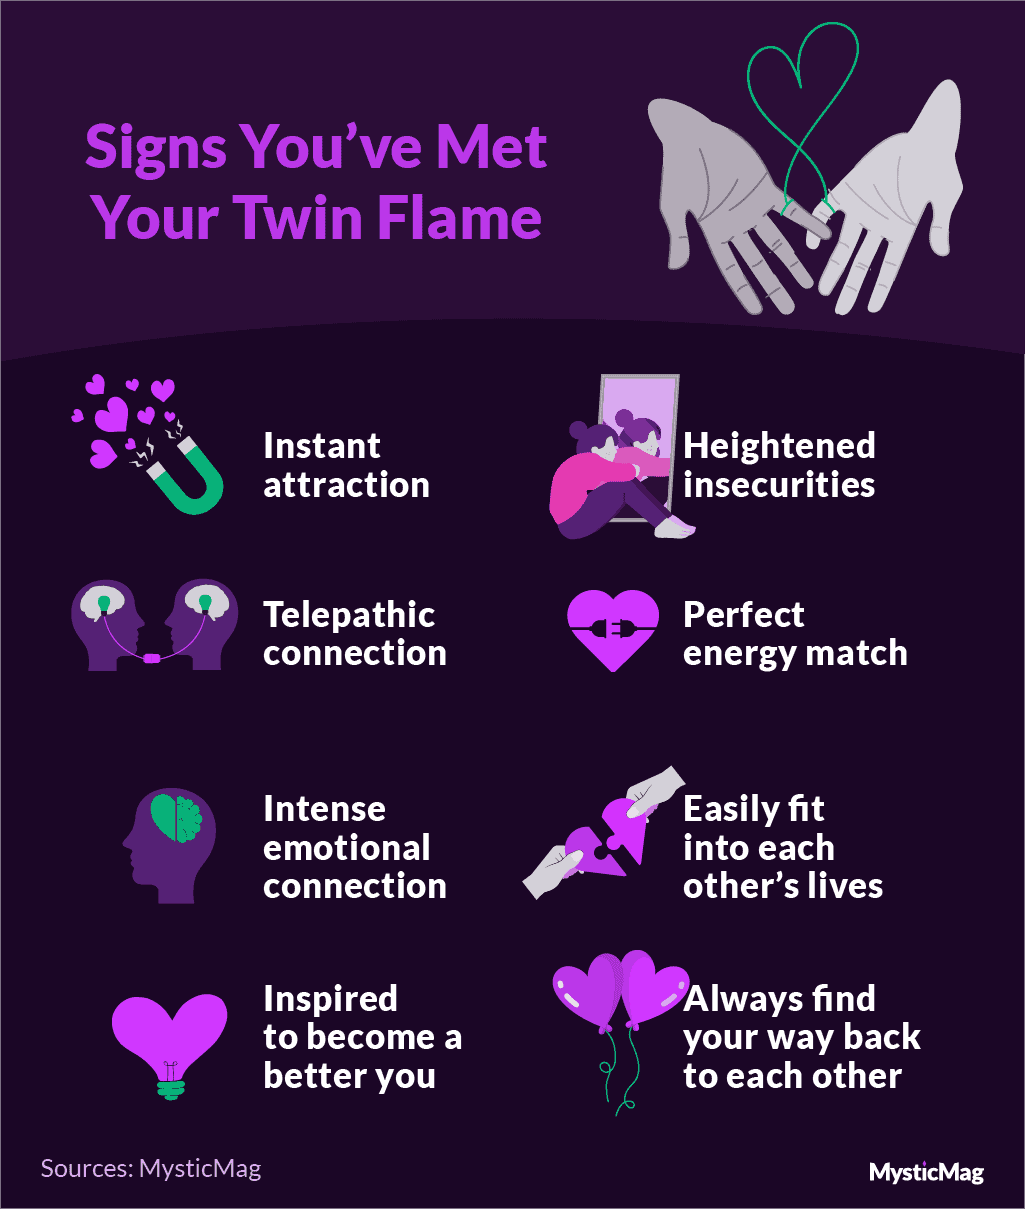 Signs you've met your twinflame